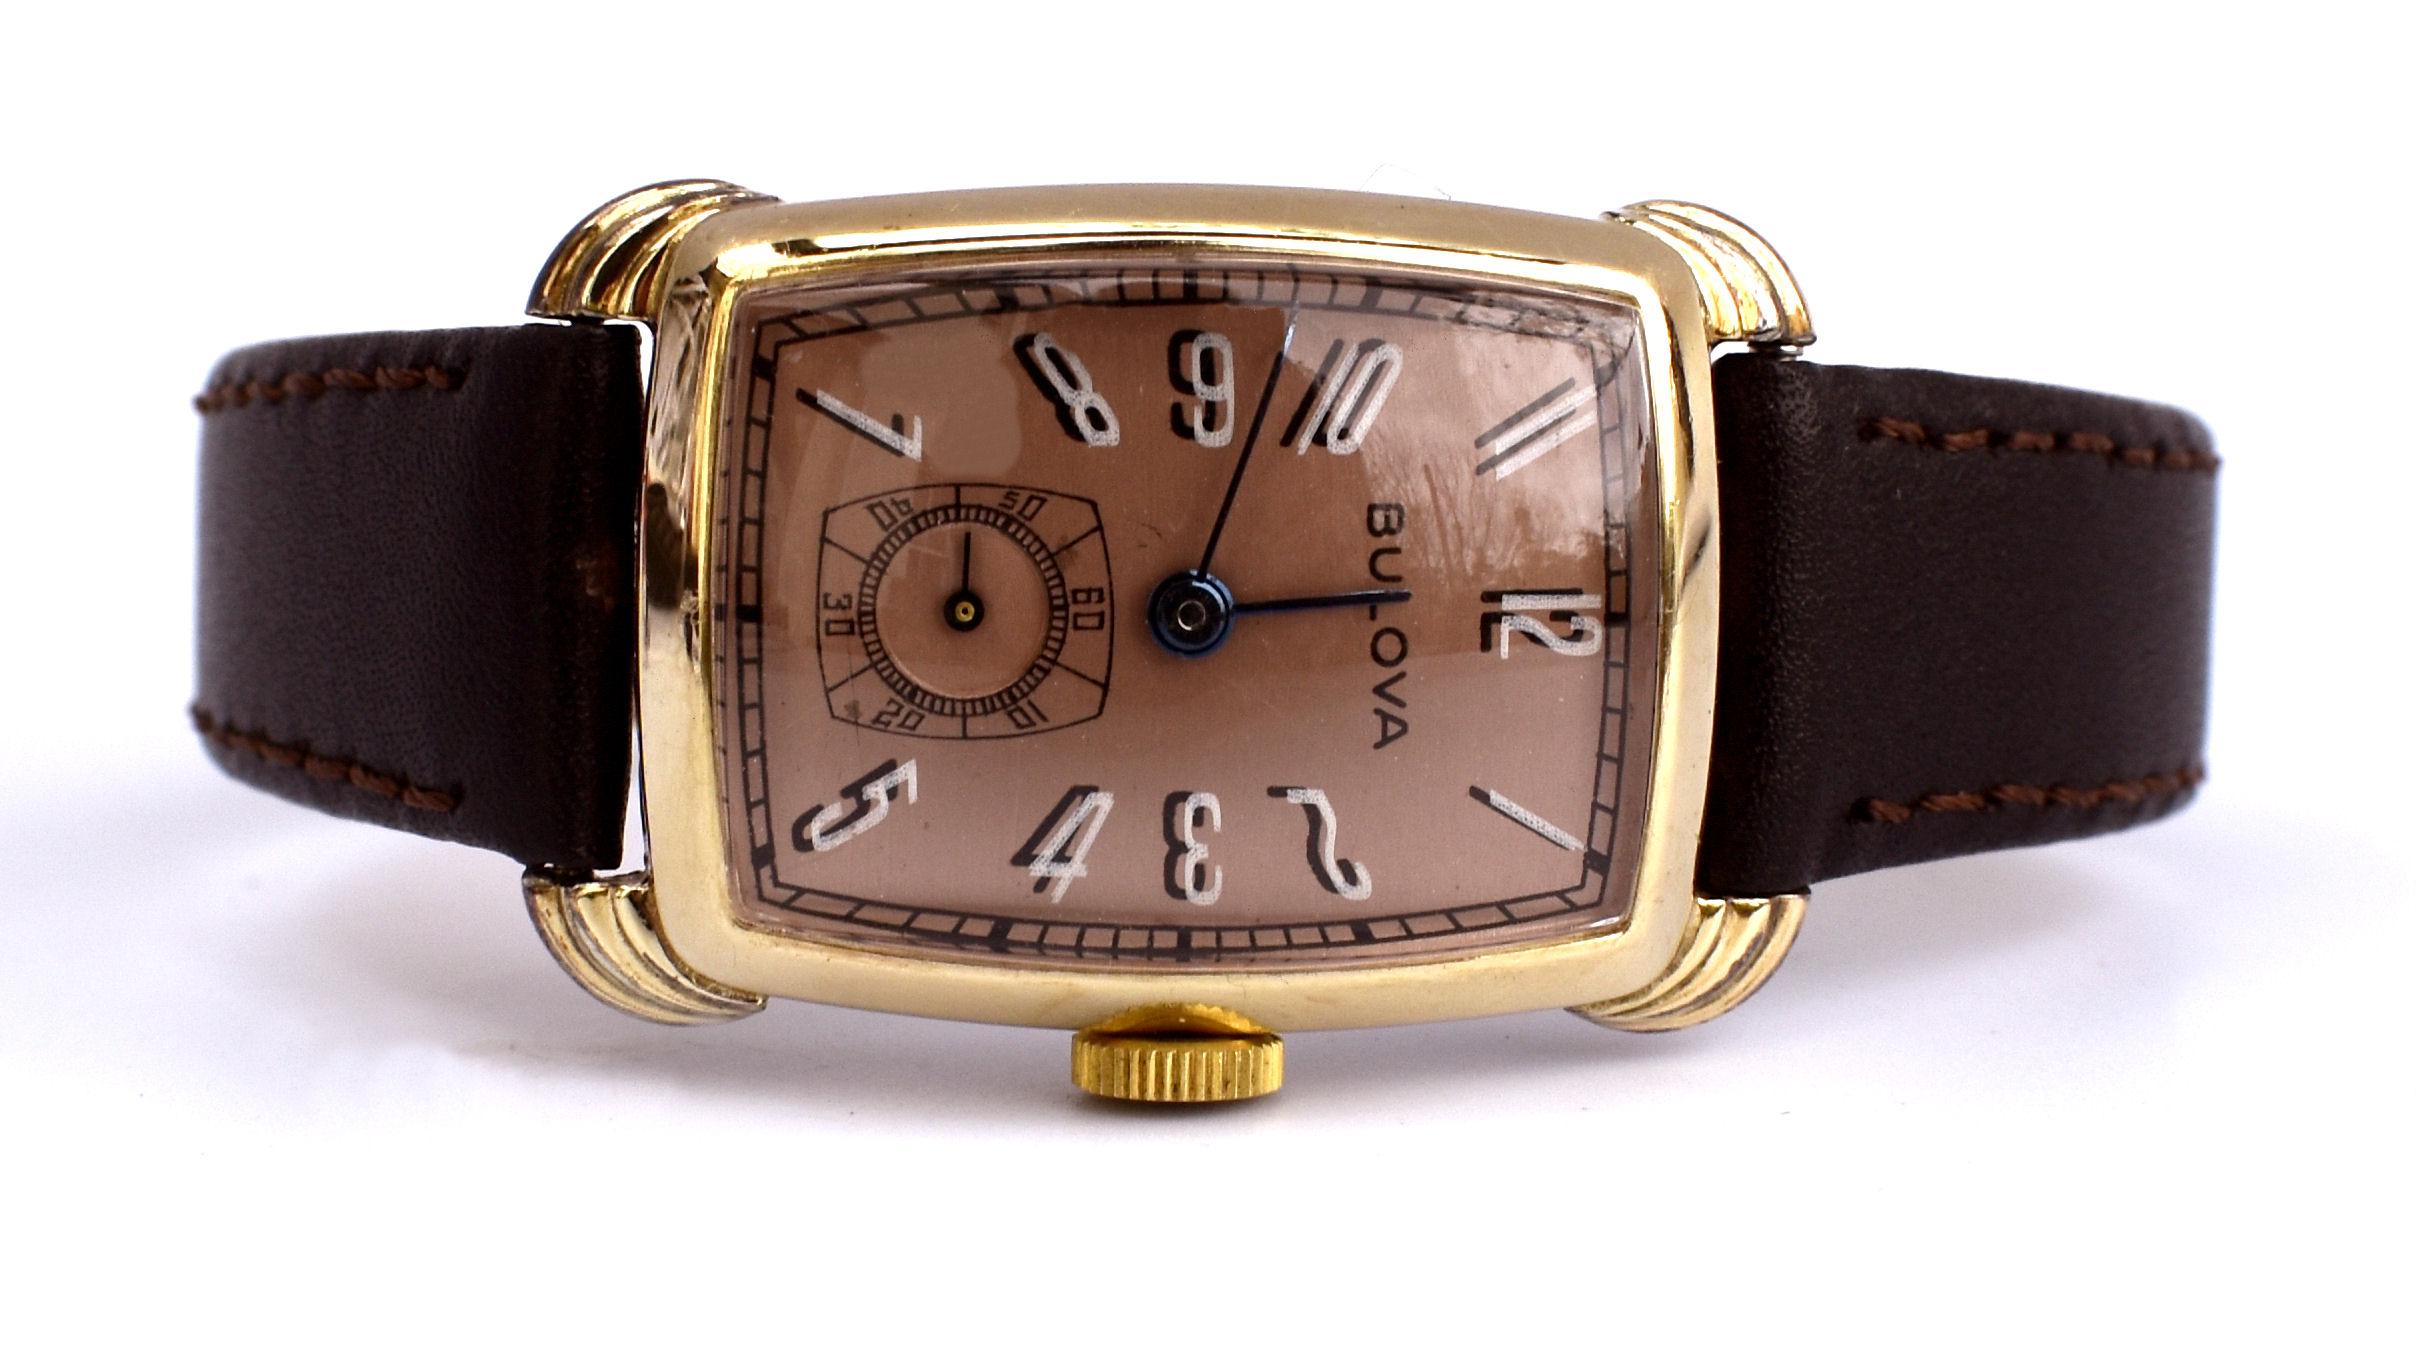 For your consideration is this fabulously stylish Art Deco Gents 1942 BULOVA SENATOR Gents Watch .Very good vintage condition throughout. The dial is the real hero of this watch and any Art Deco fan will appreciate the numerals which can't be